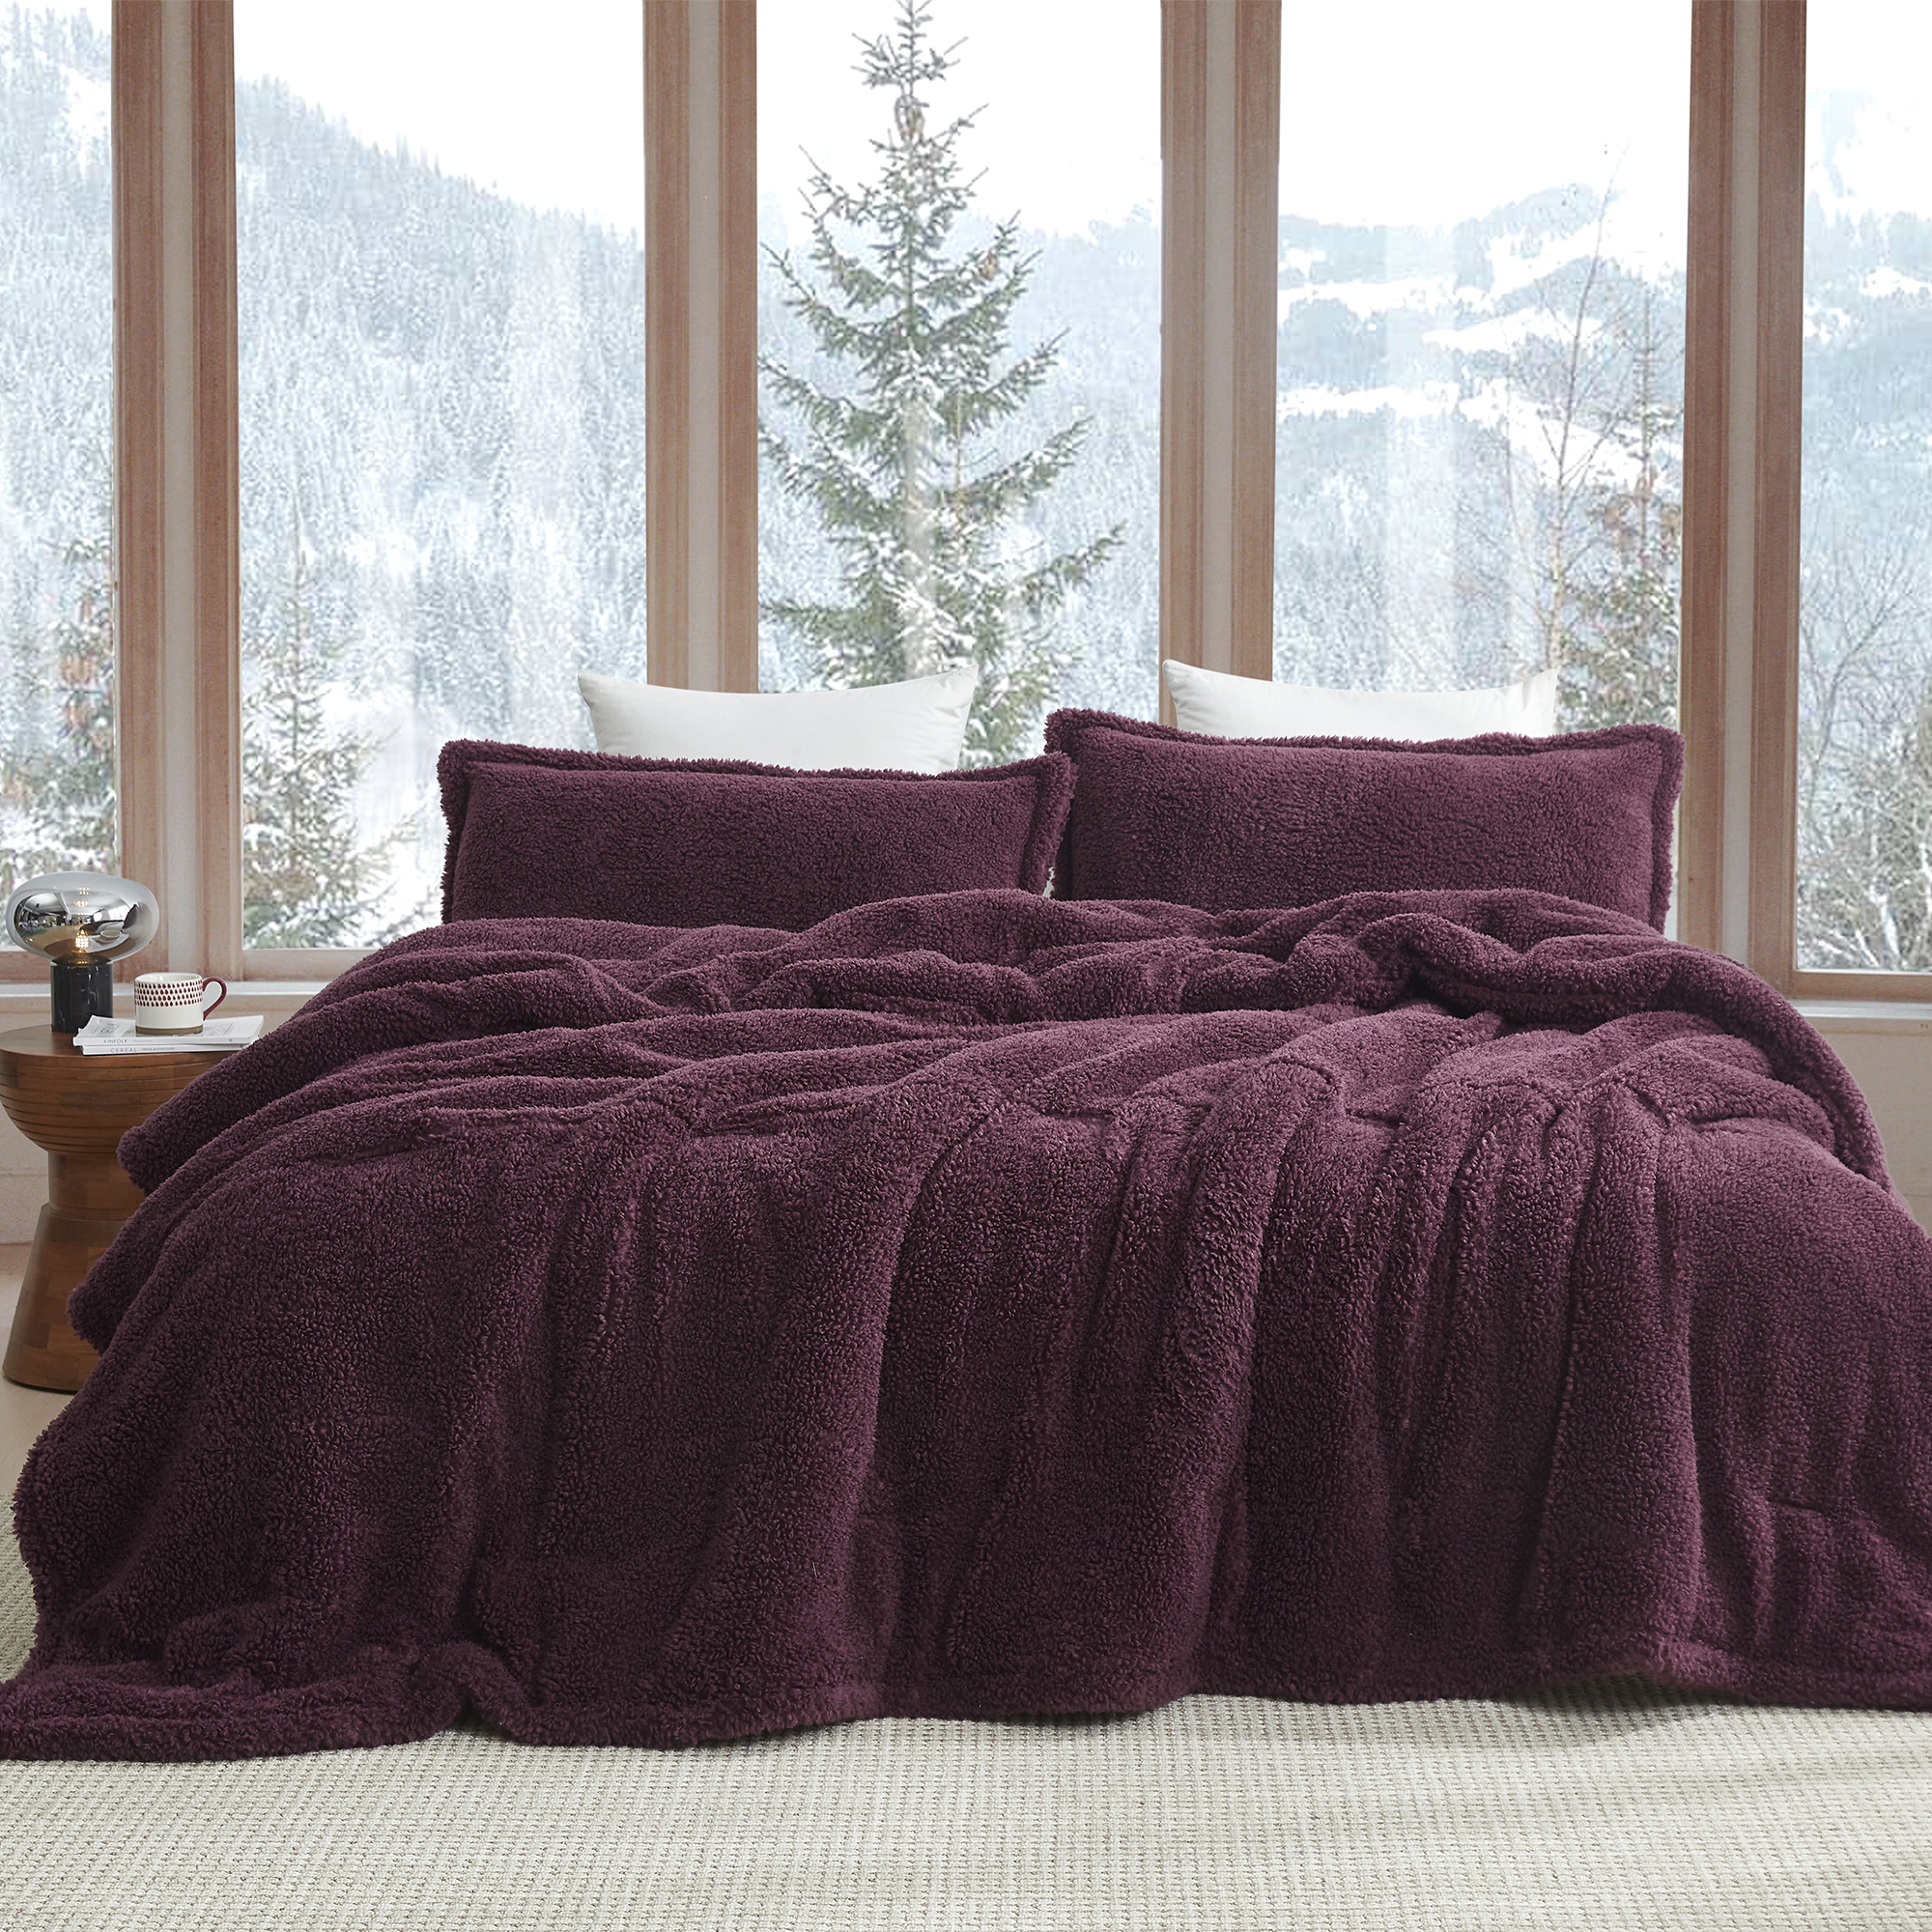 Unfluffin Believable - Coma Inducer® Oversized Comforter - Burgundy